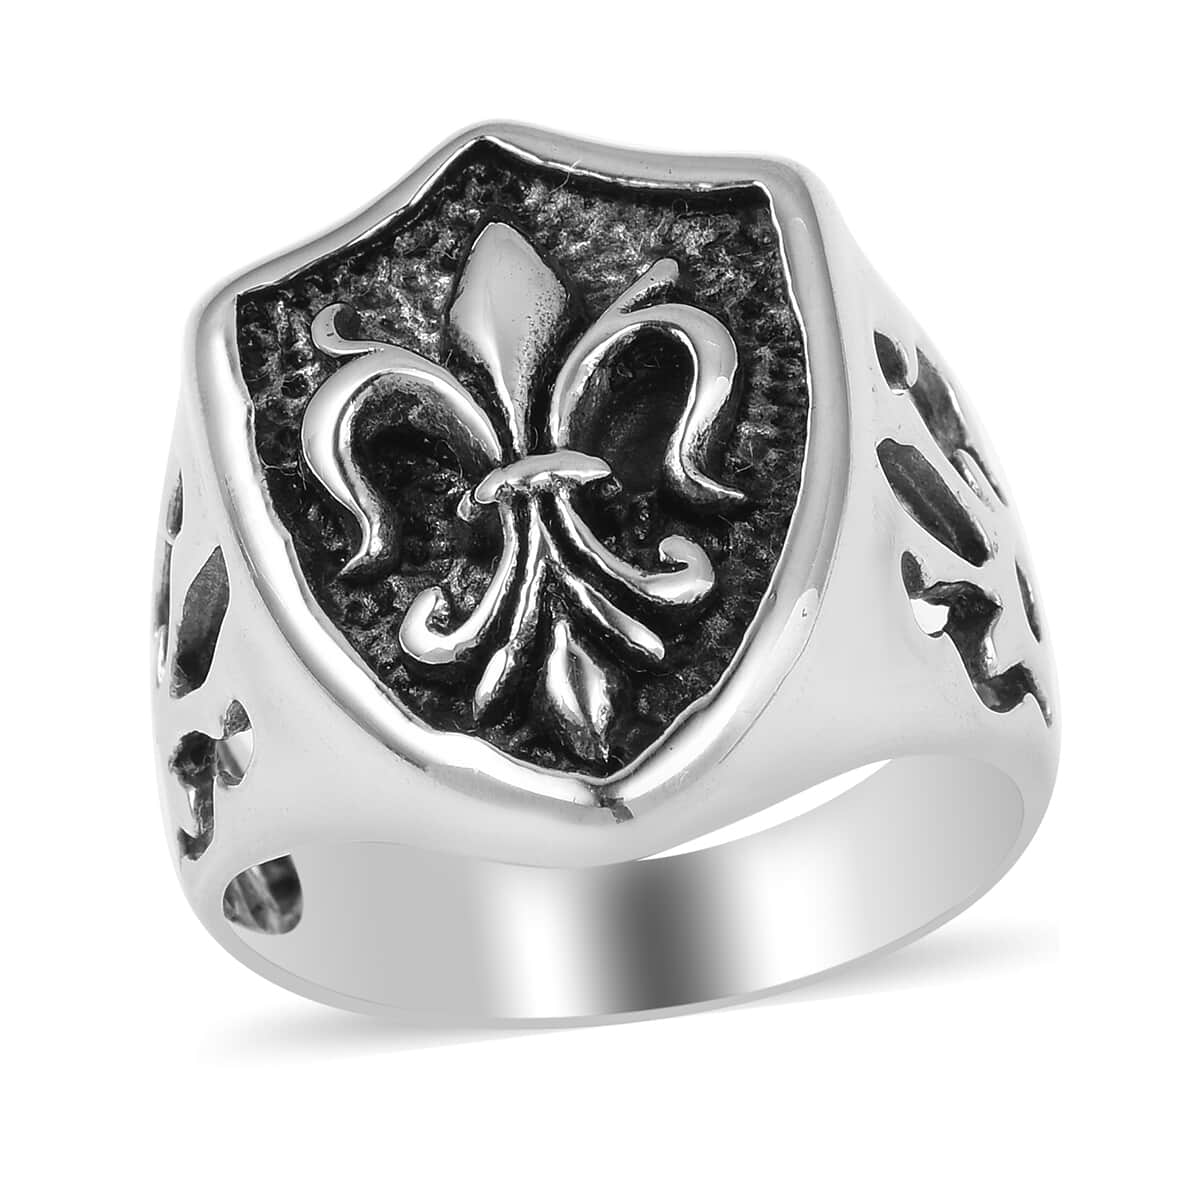 Fleur De Lis Men's Ring Size 12 and Pendant Necklace 24 Inches in Black Oxidized Stainless Steel image number 1